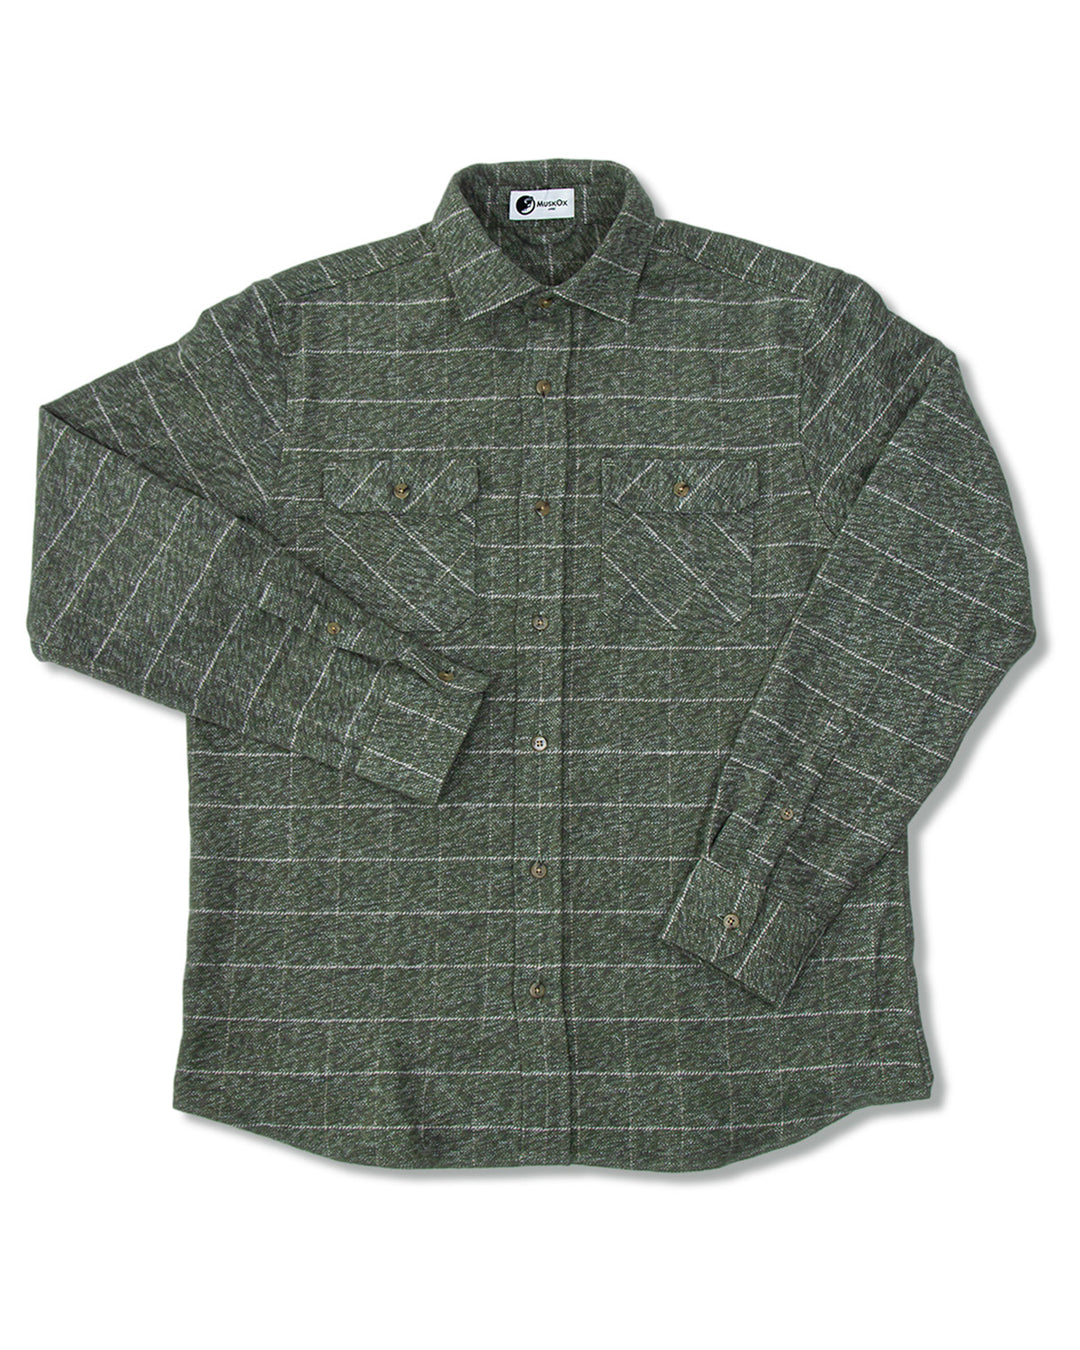 The Grand Flannel, Moss Green Heavyweight Cotton Flannel Shirt for